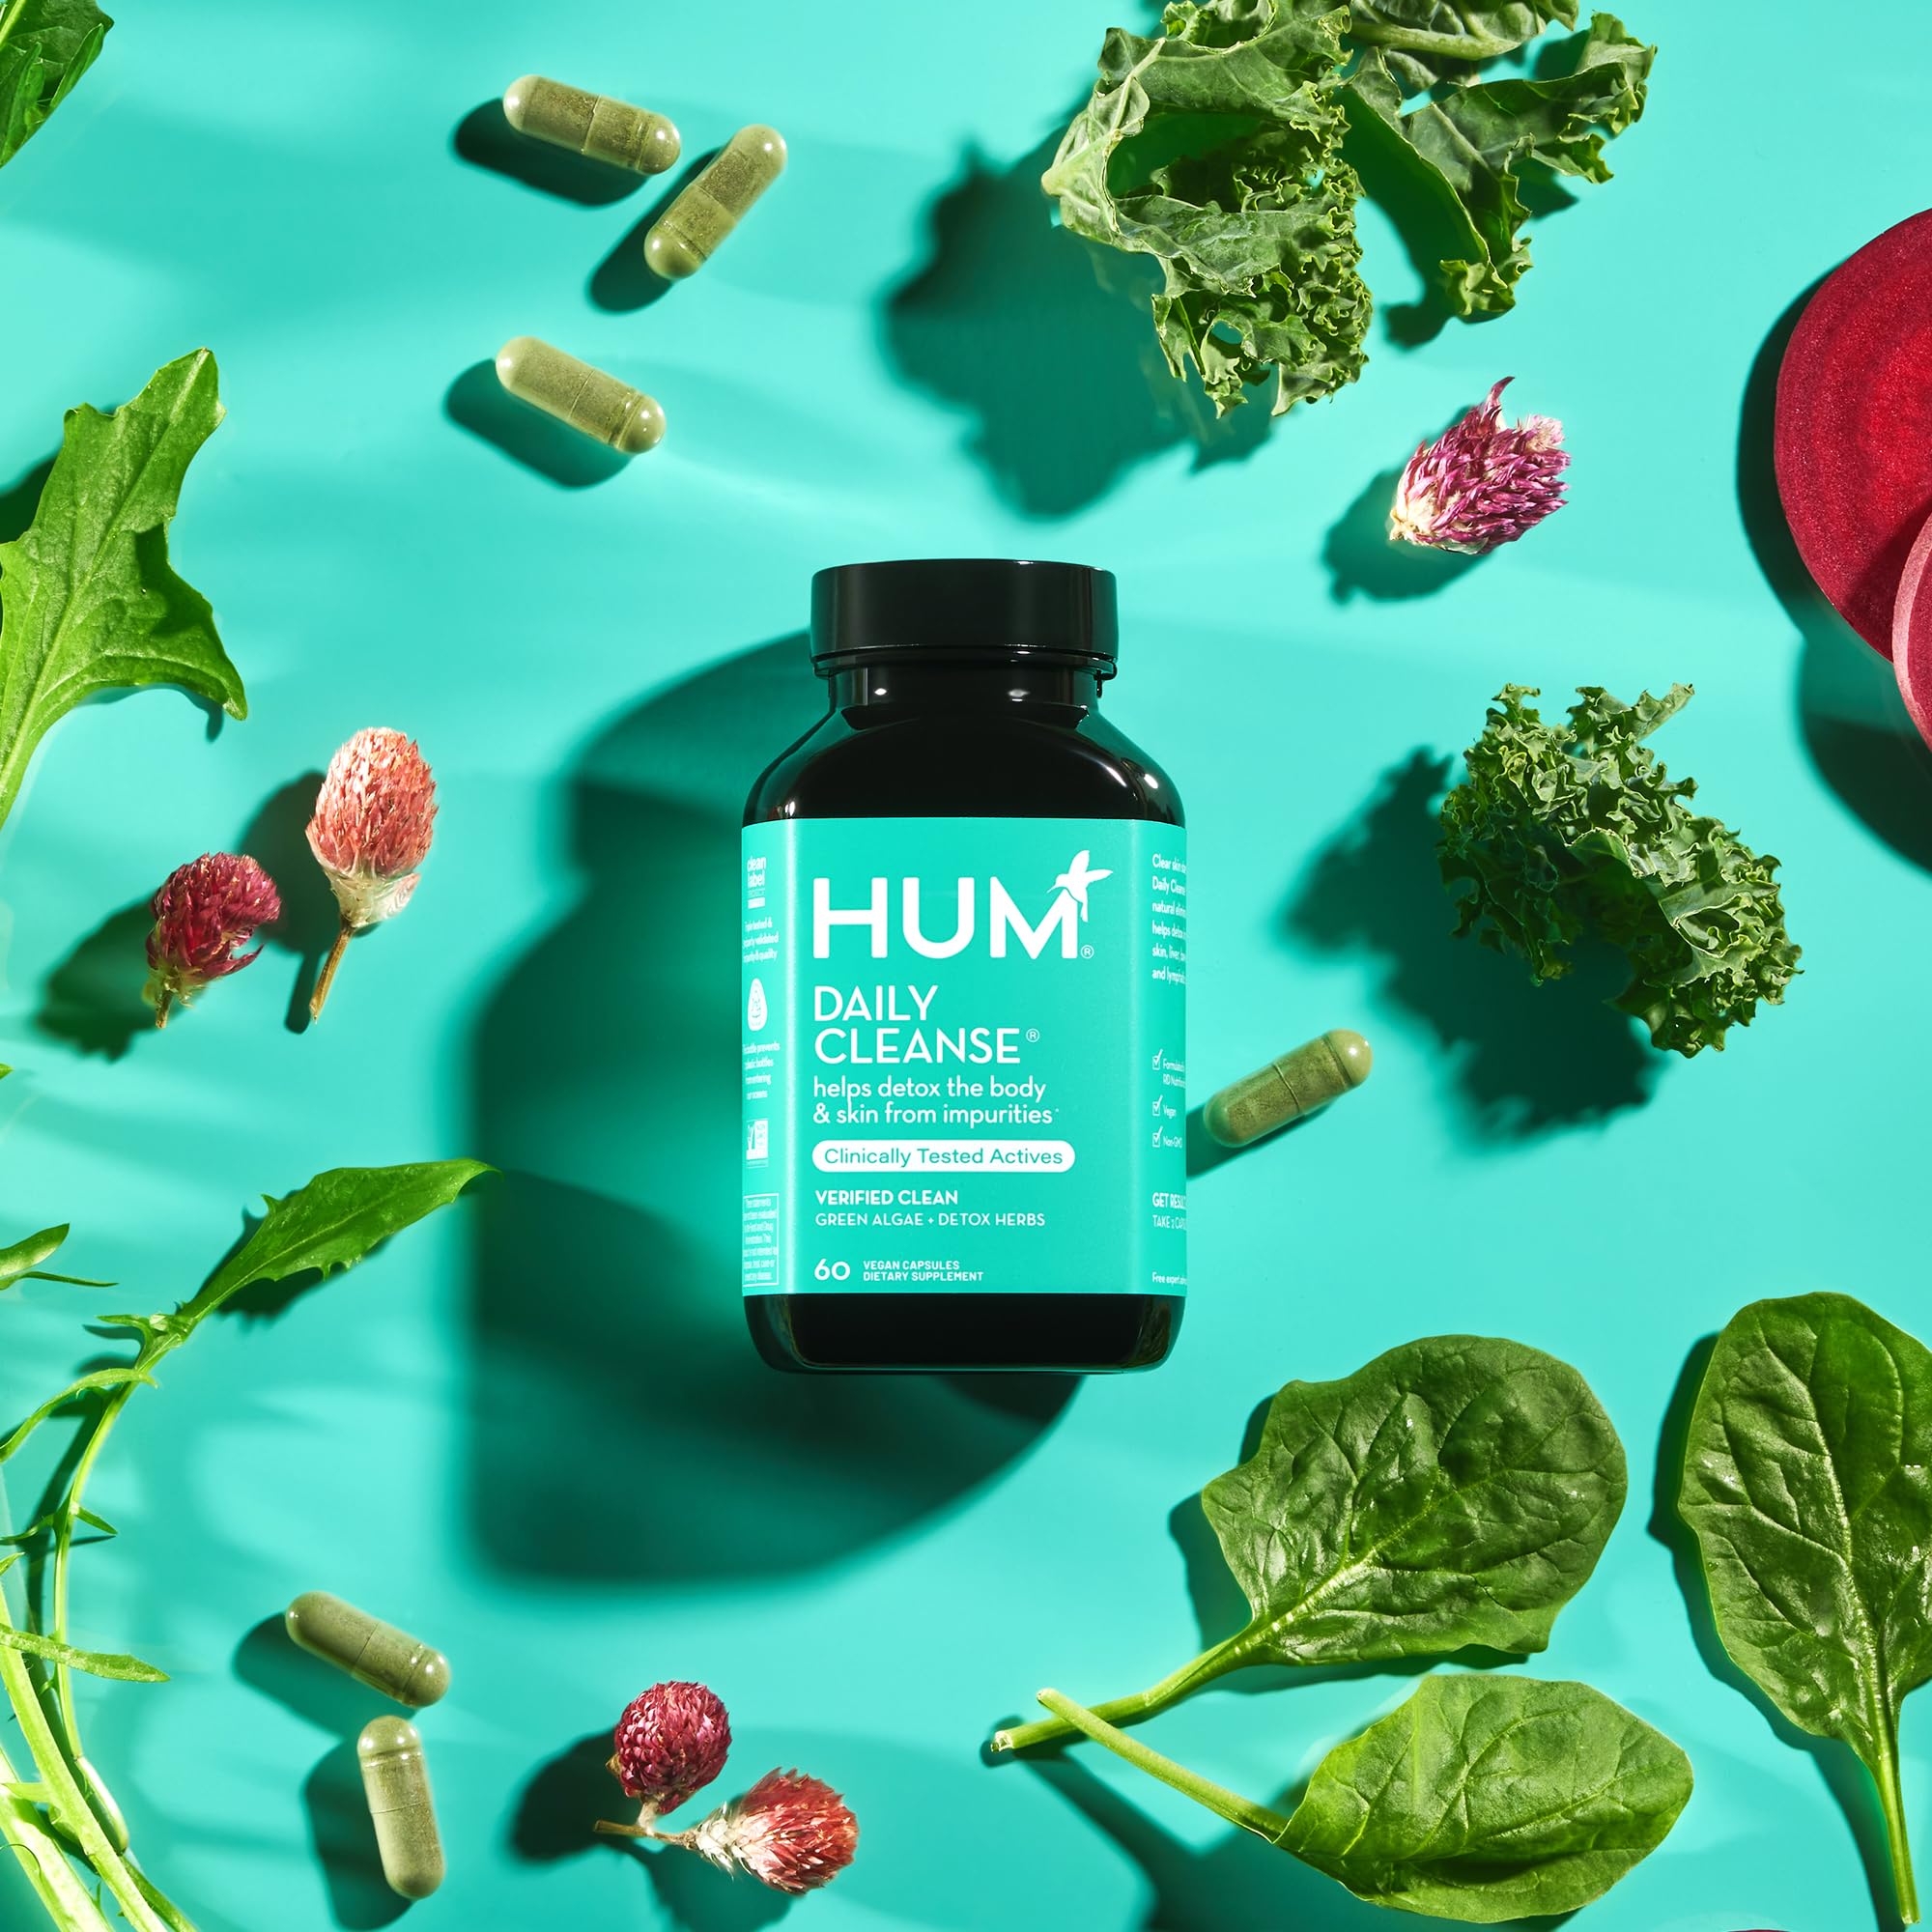 HUM Daily Cleanse Acne Supplements - Support for Clear Skin & Improved Digestion with Organic Algae, Detoxifying Herbs, Vitamins & Minerals - Skin Supplement for Women and Men (60 Vegan Capsules)